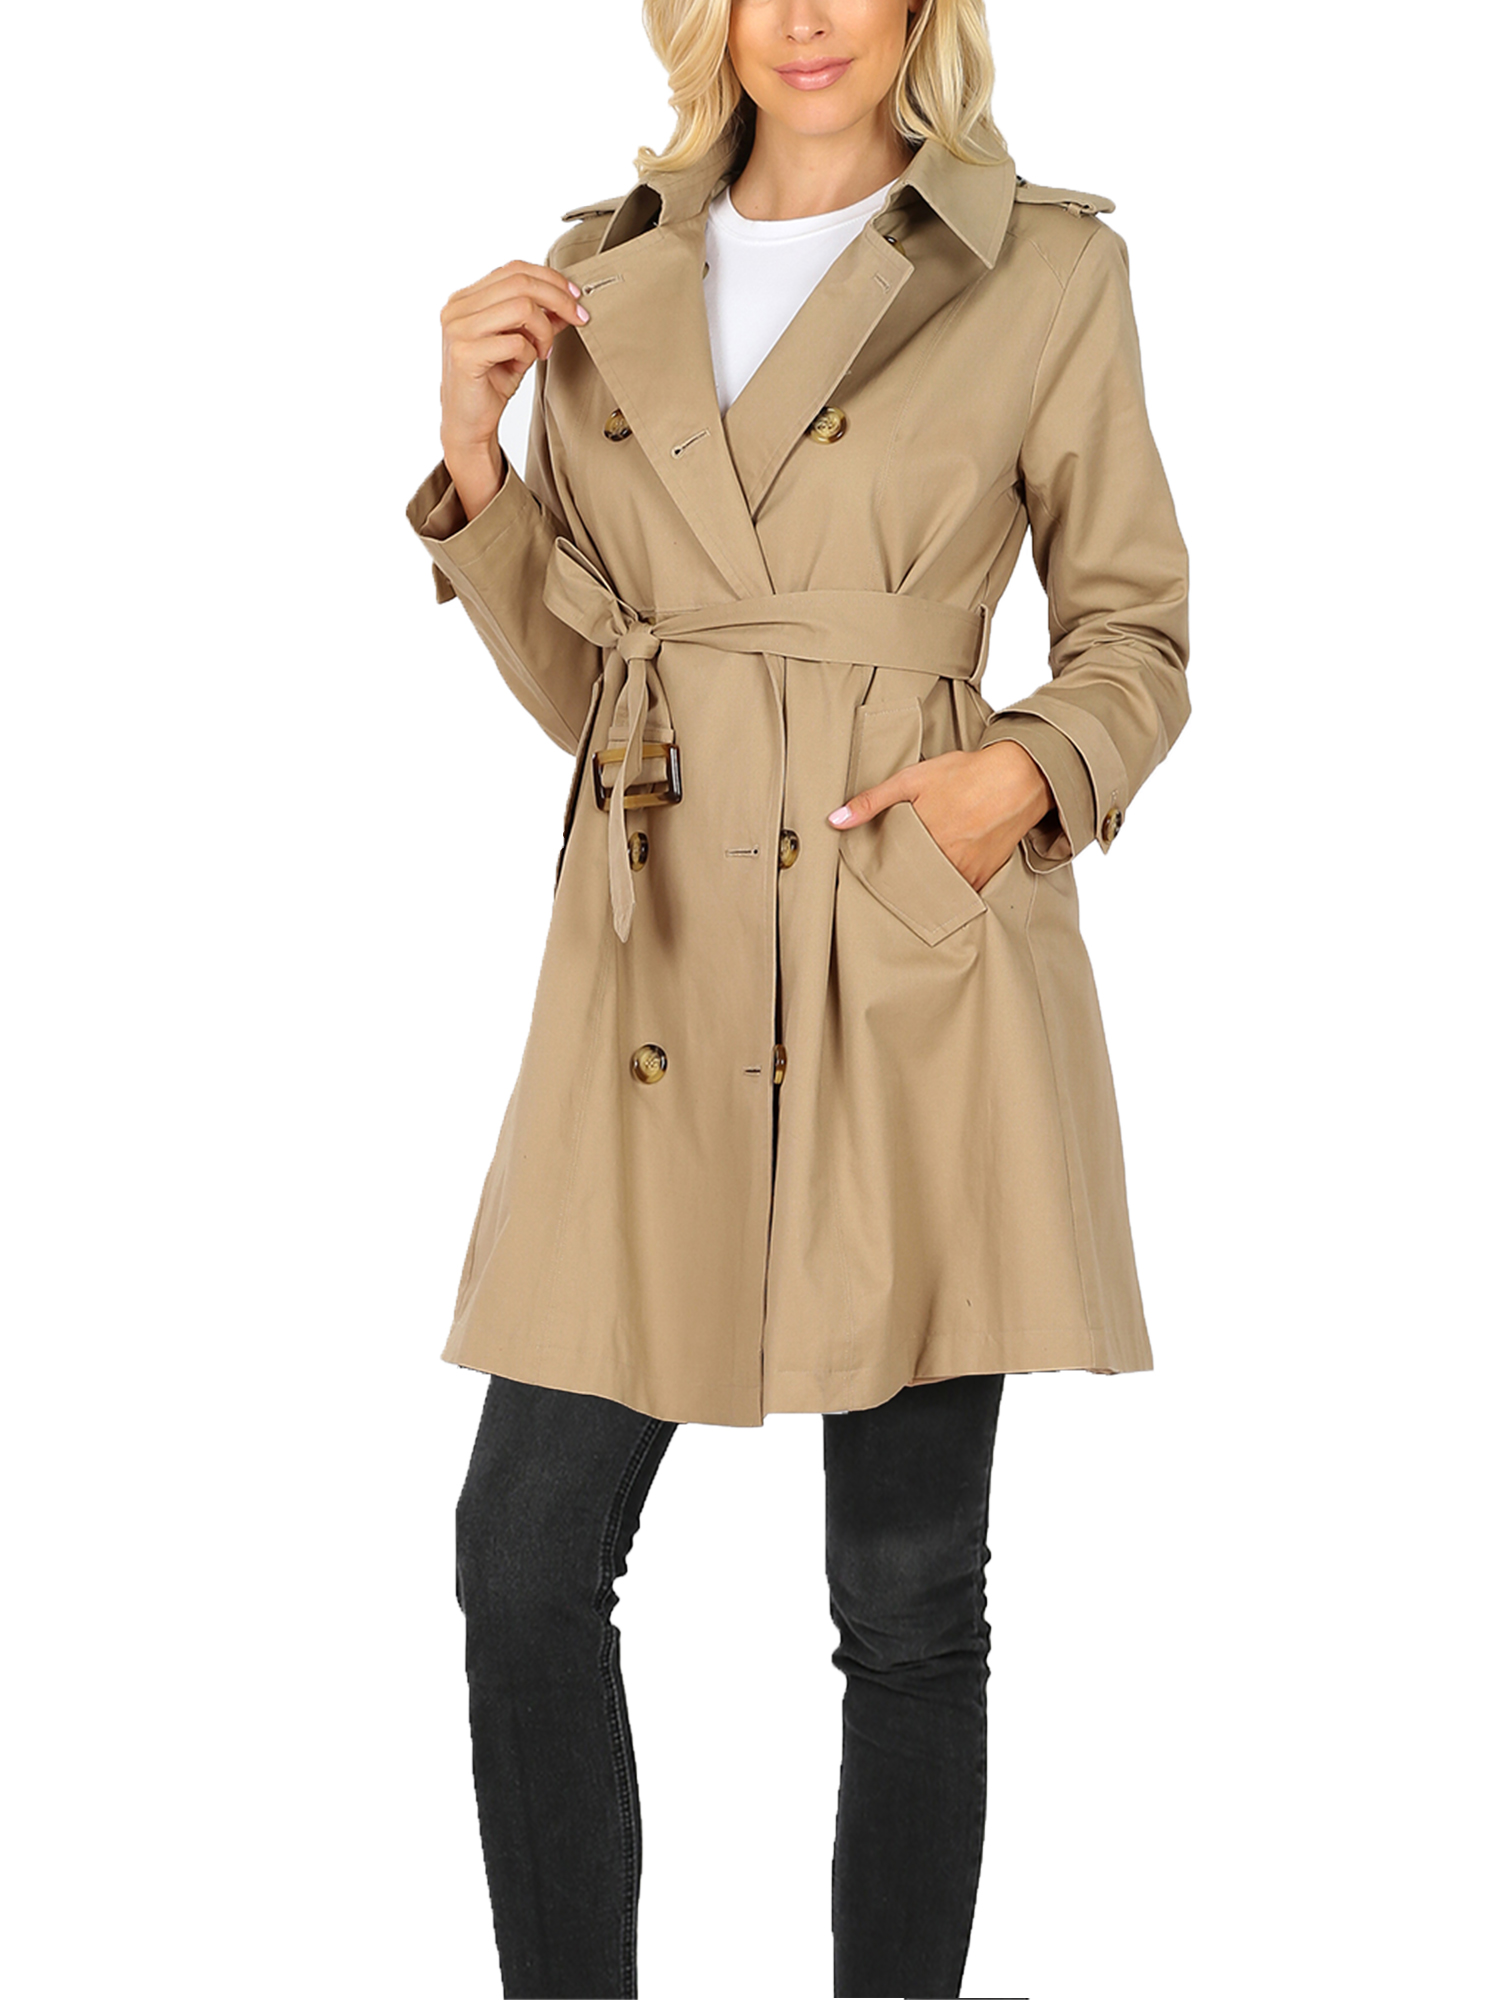 KOGMO Womens Double Breasted Trench Coat Jacket with Waist Belt - image 4 of 5